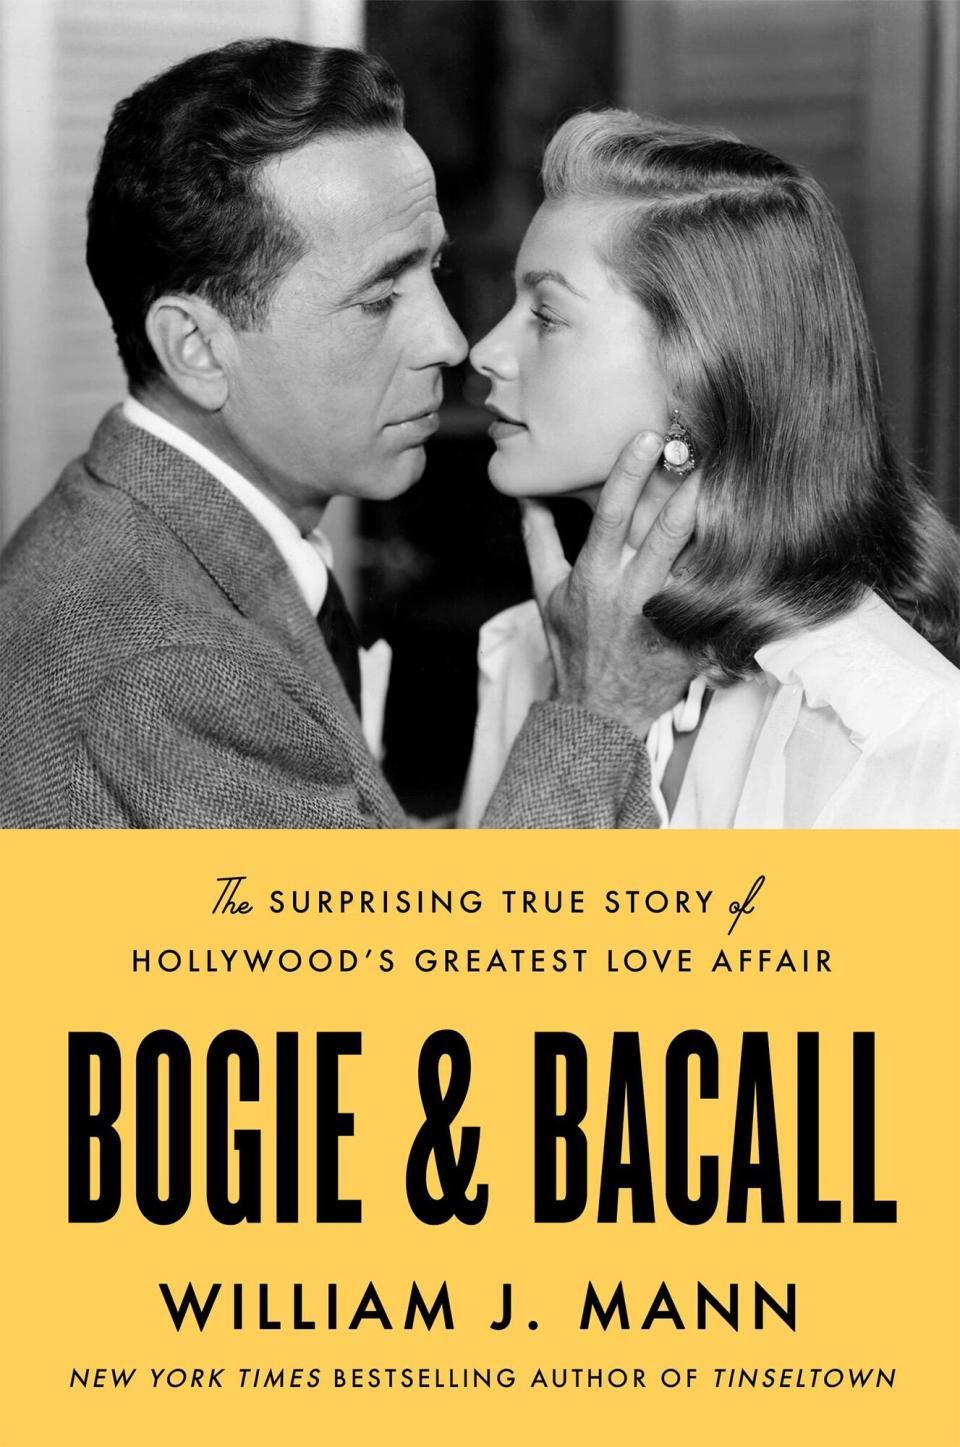 Bogie and Bacall by Wllliam J. Mann